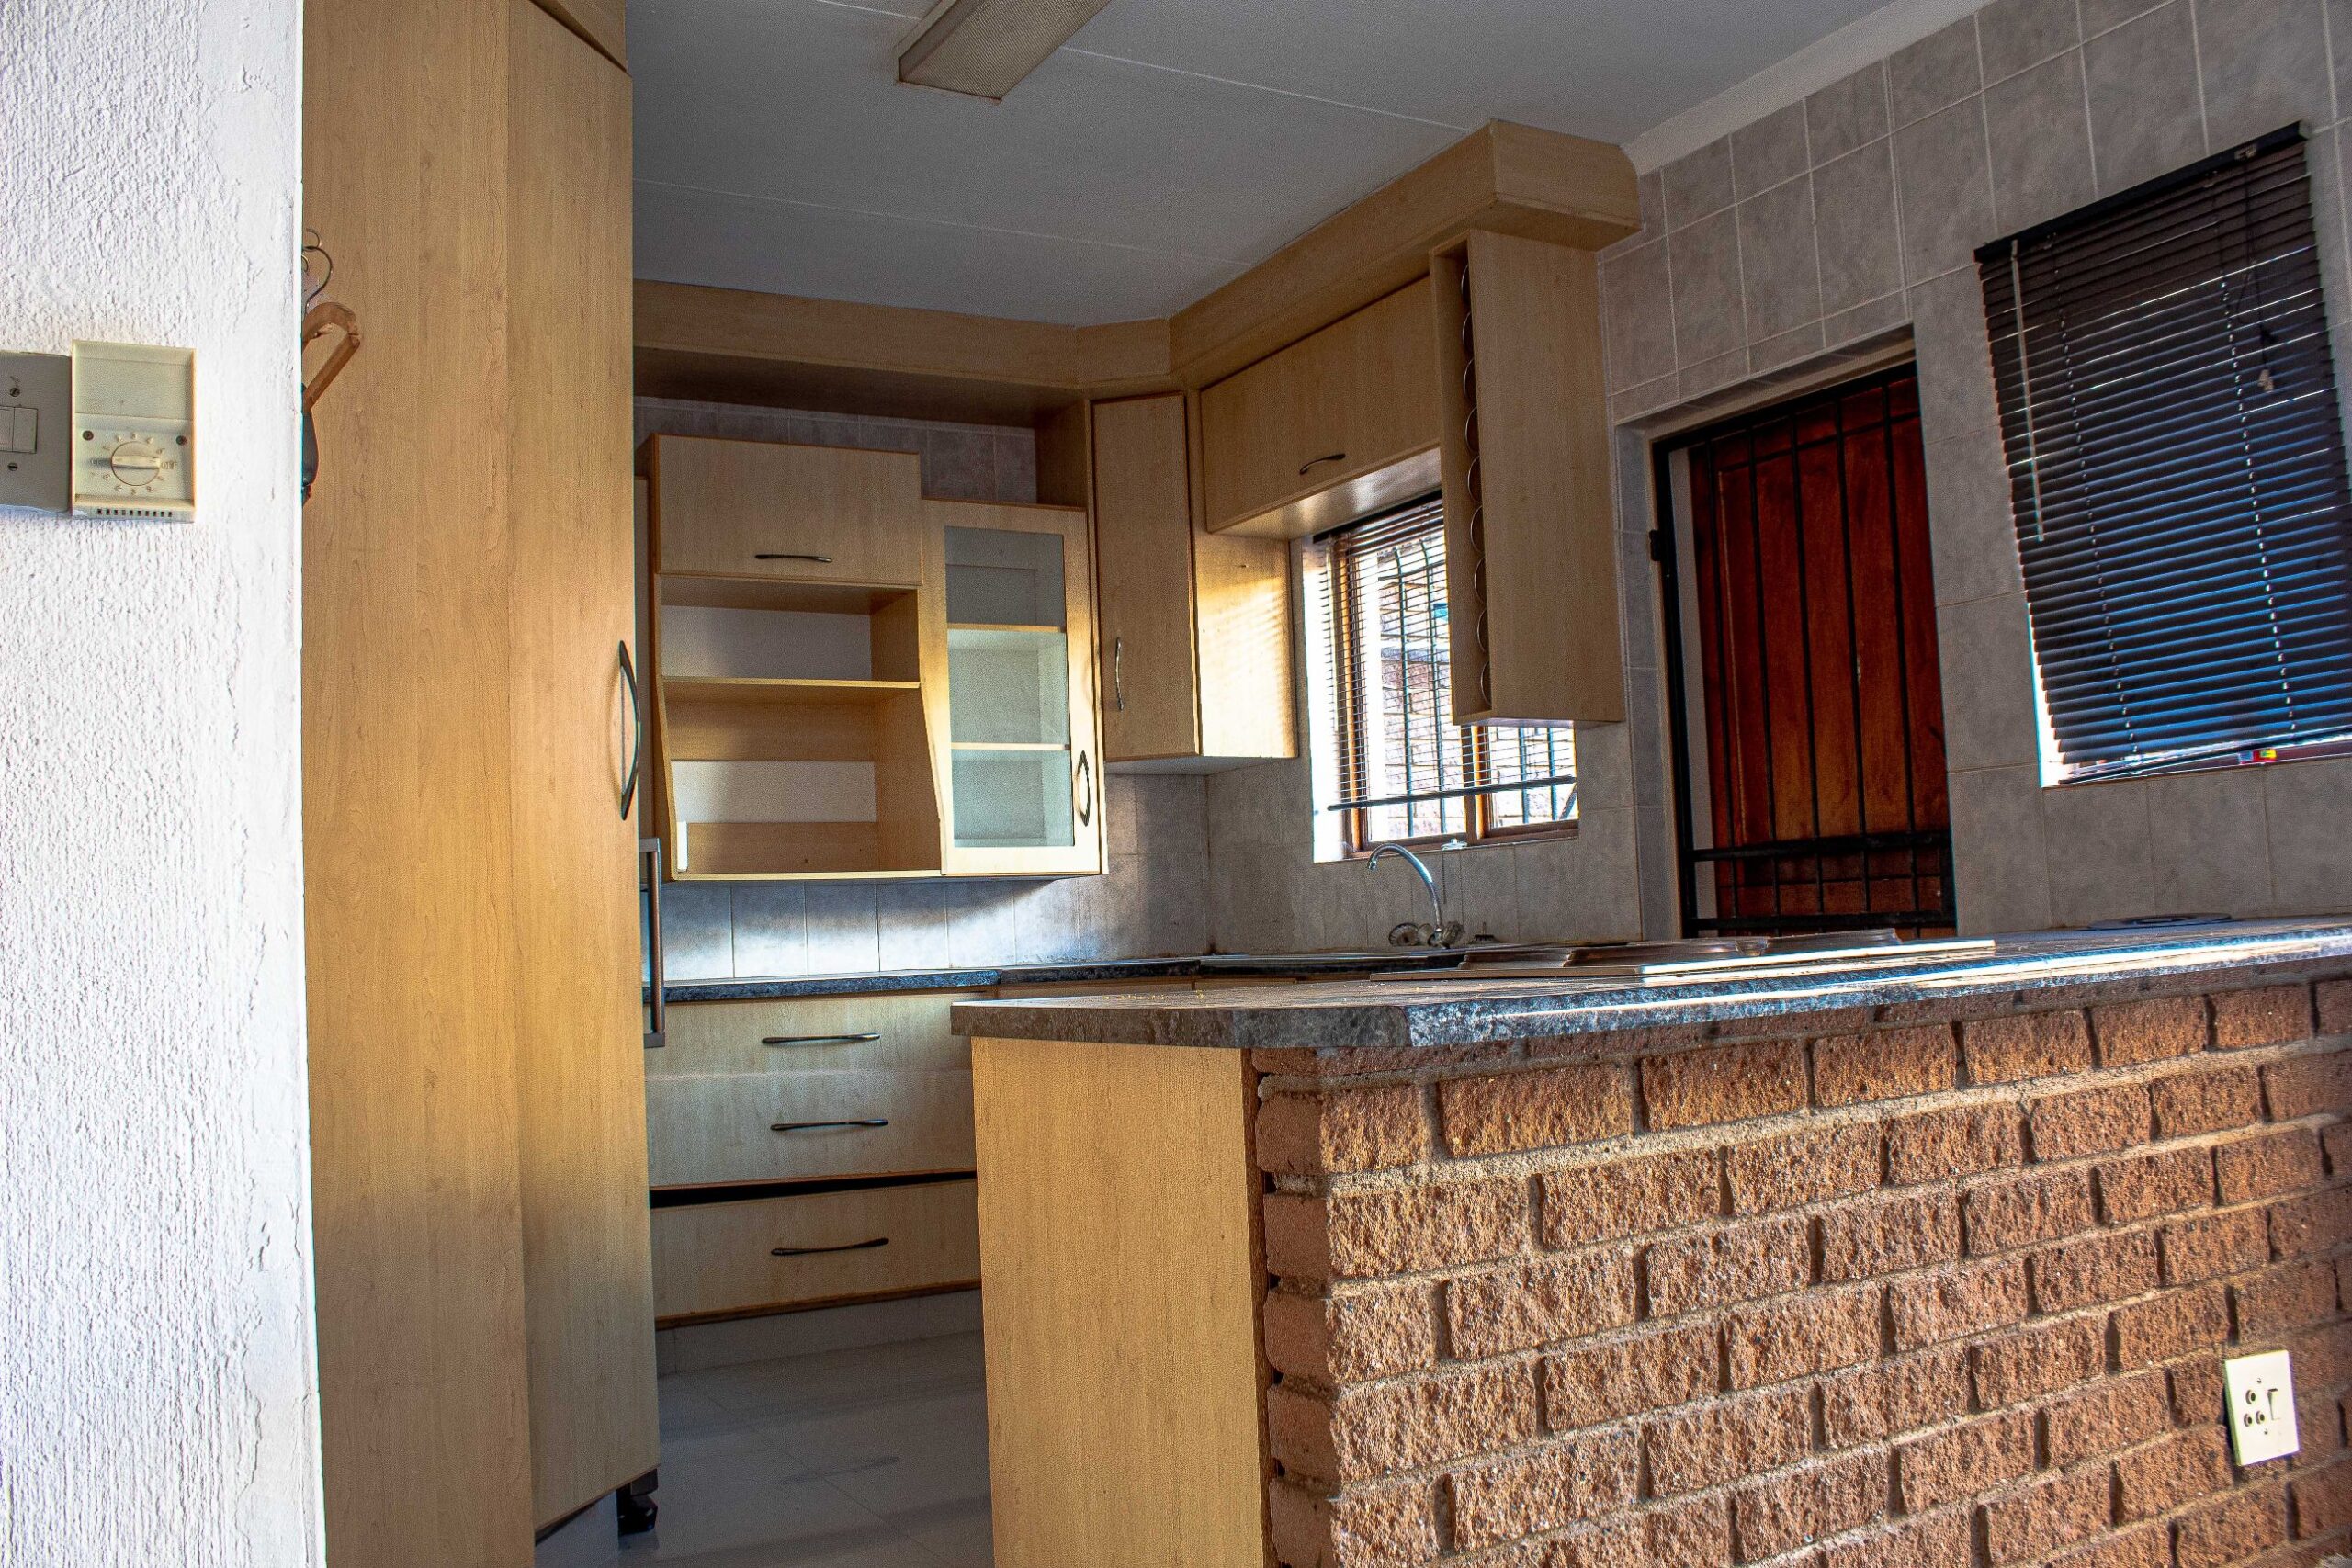 3 Bedrooms 2 Baths Spacious House For Sale in Sabie Ext 9.